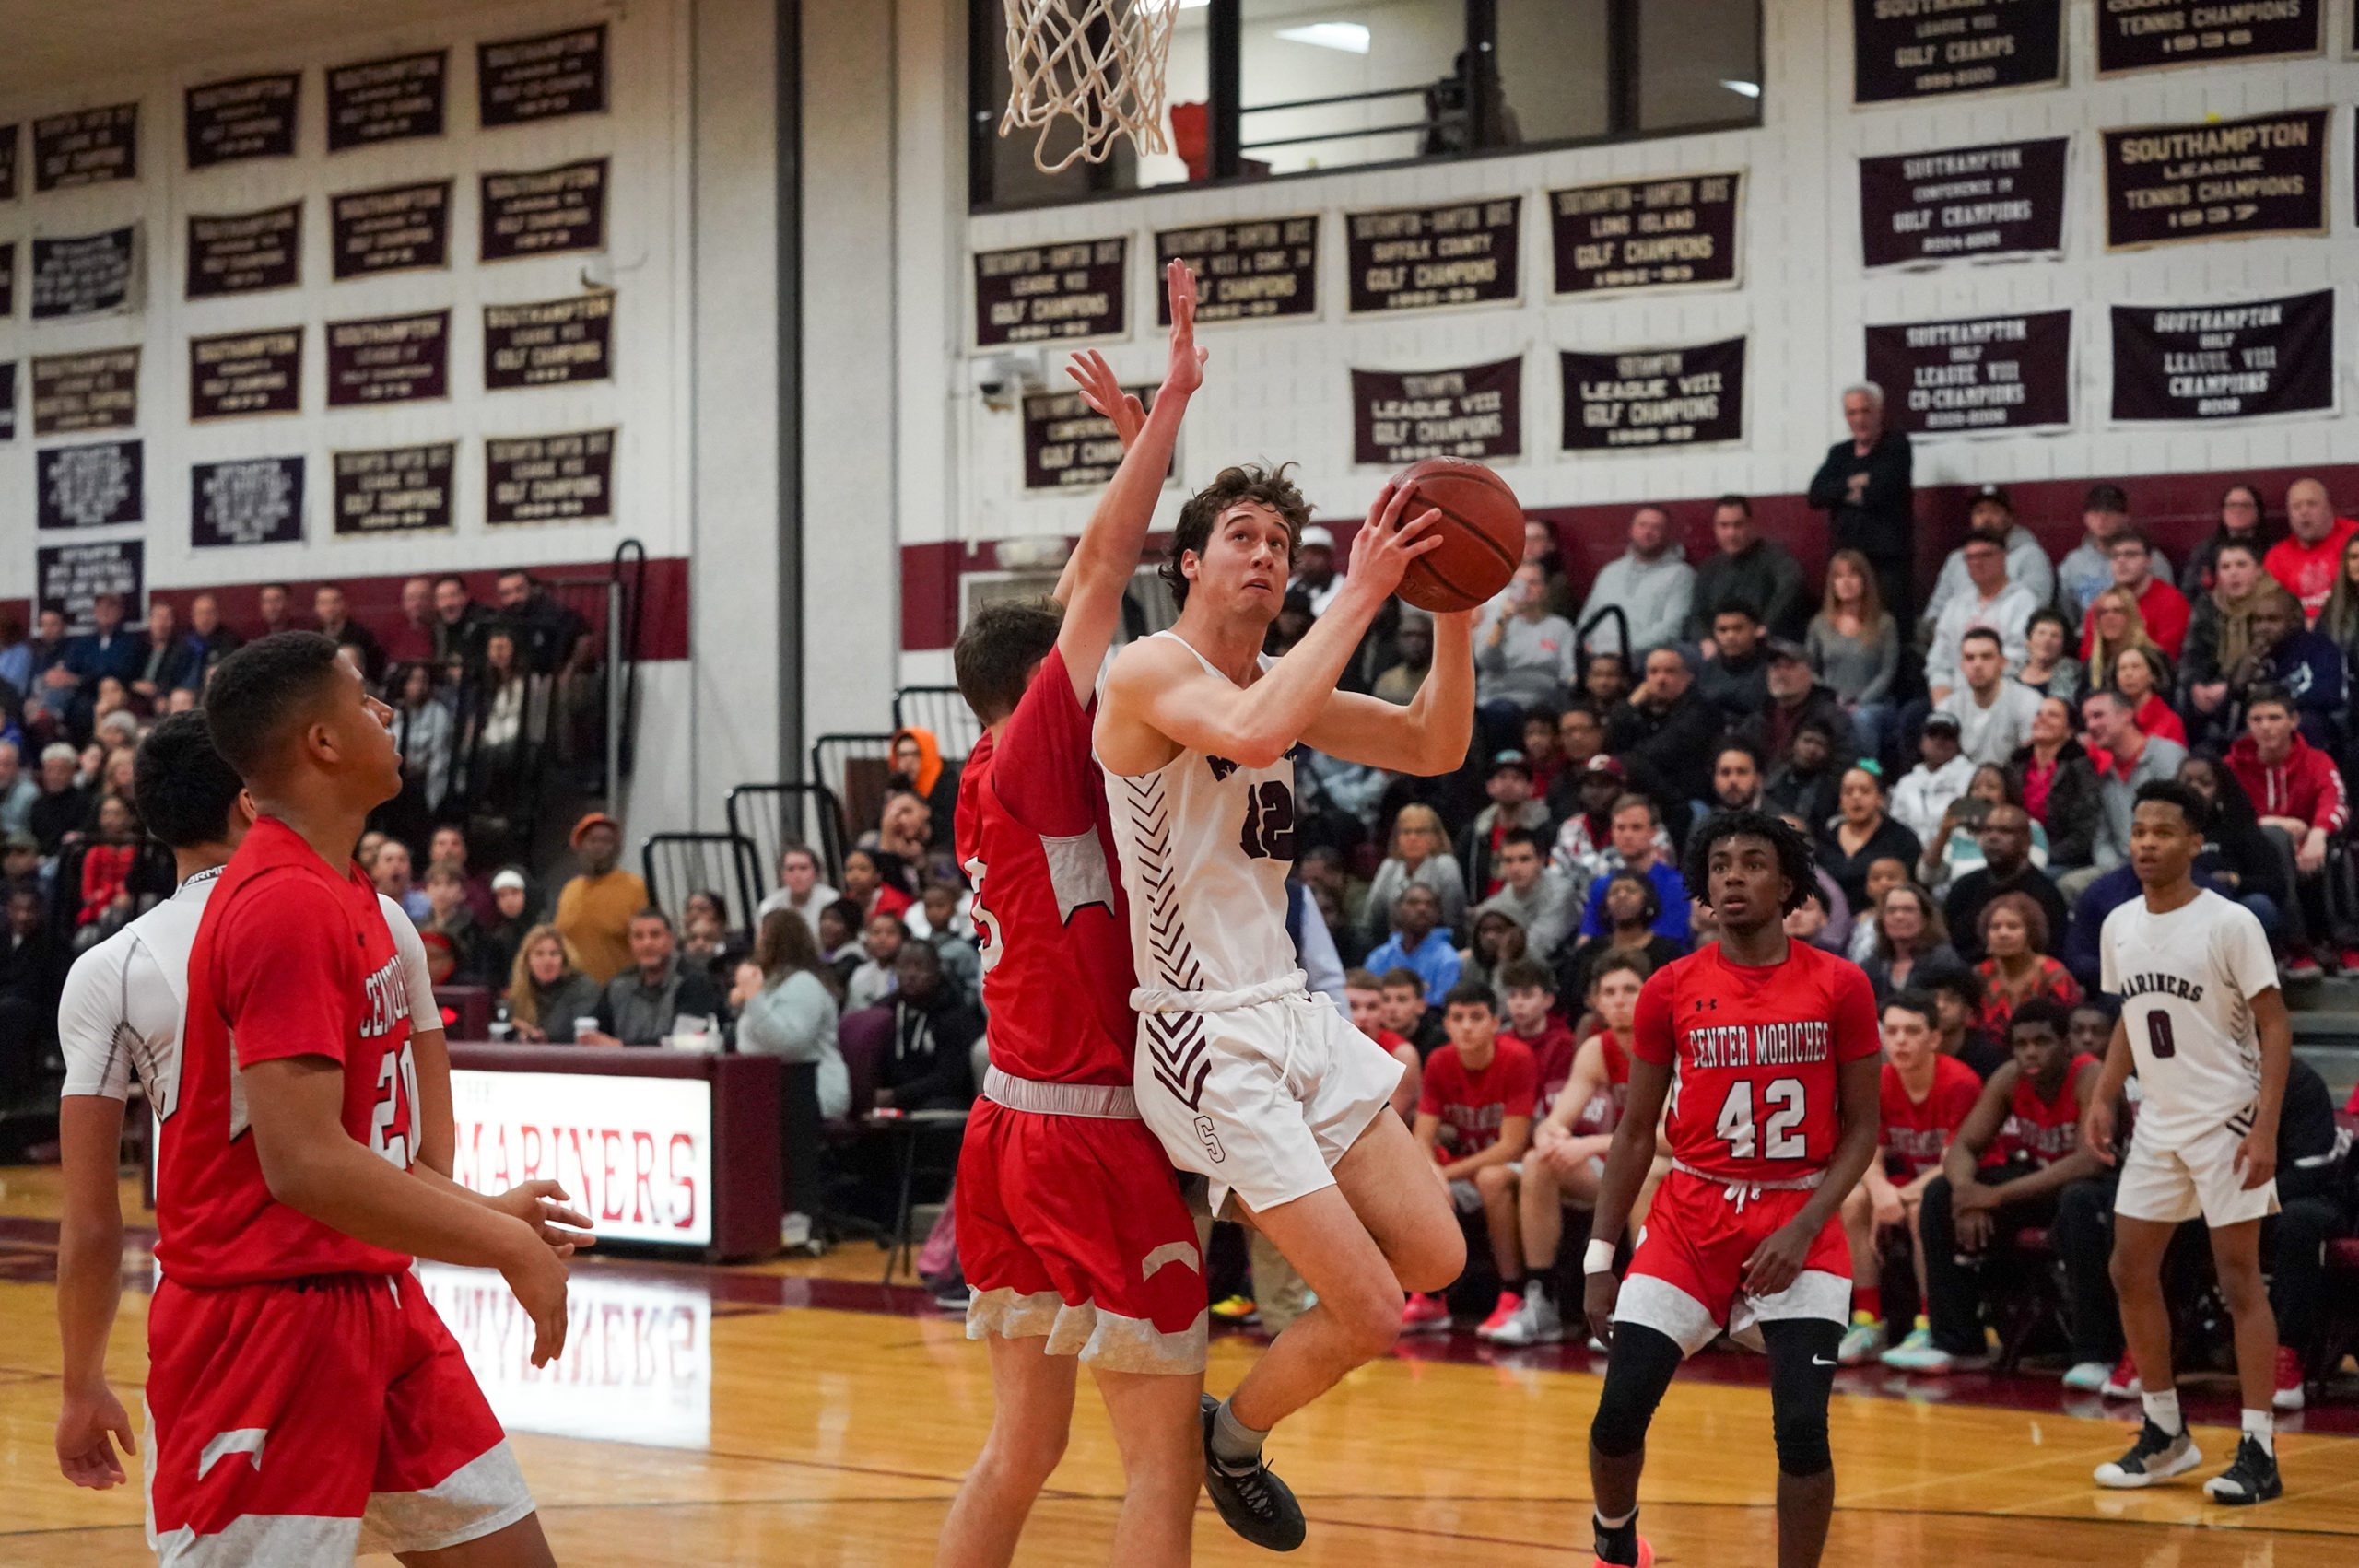 Southampton senior James Malone absorbs some contact while going up with a shot.